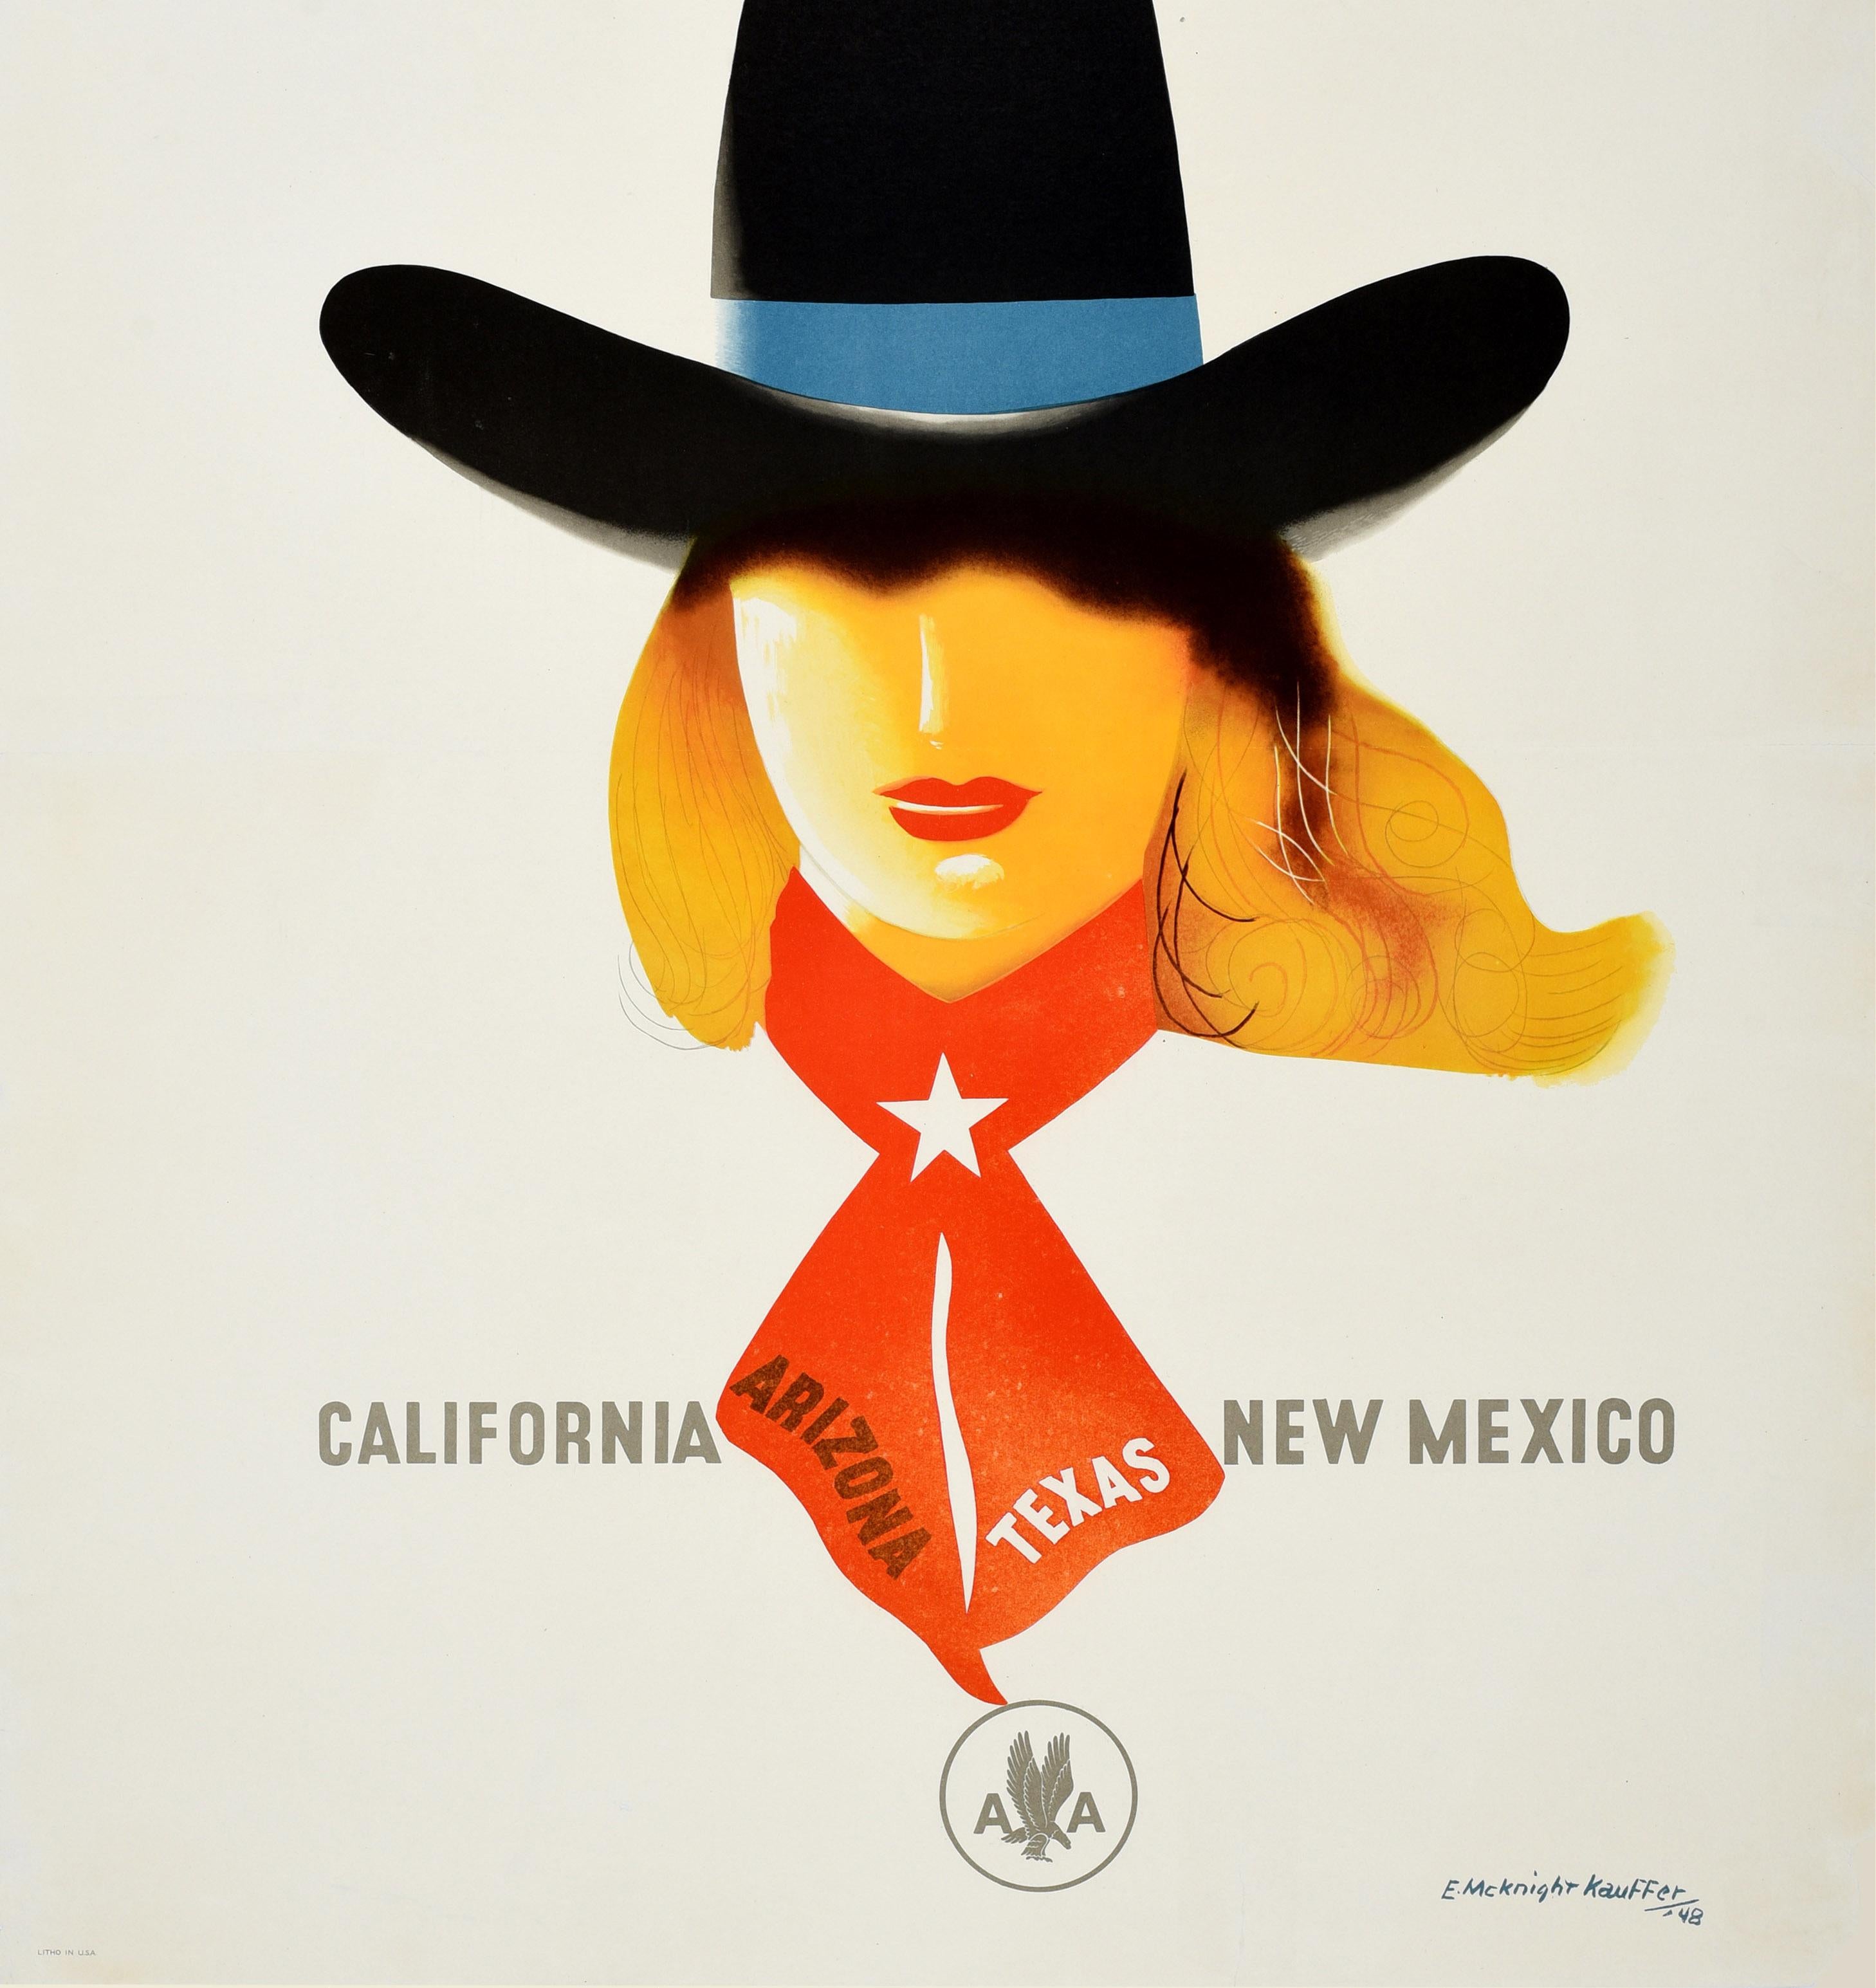 Mid-20th Century Original Vintage Travel Poster American Airlines California New Mexico Cowgirl